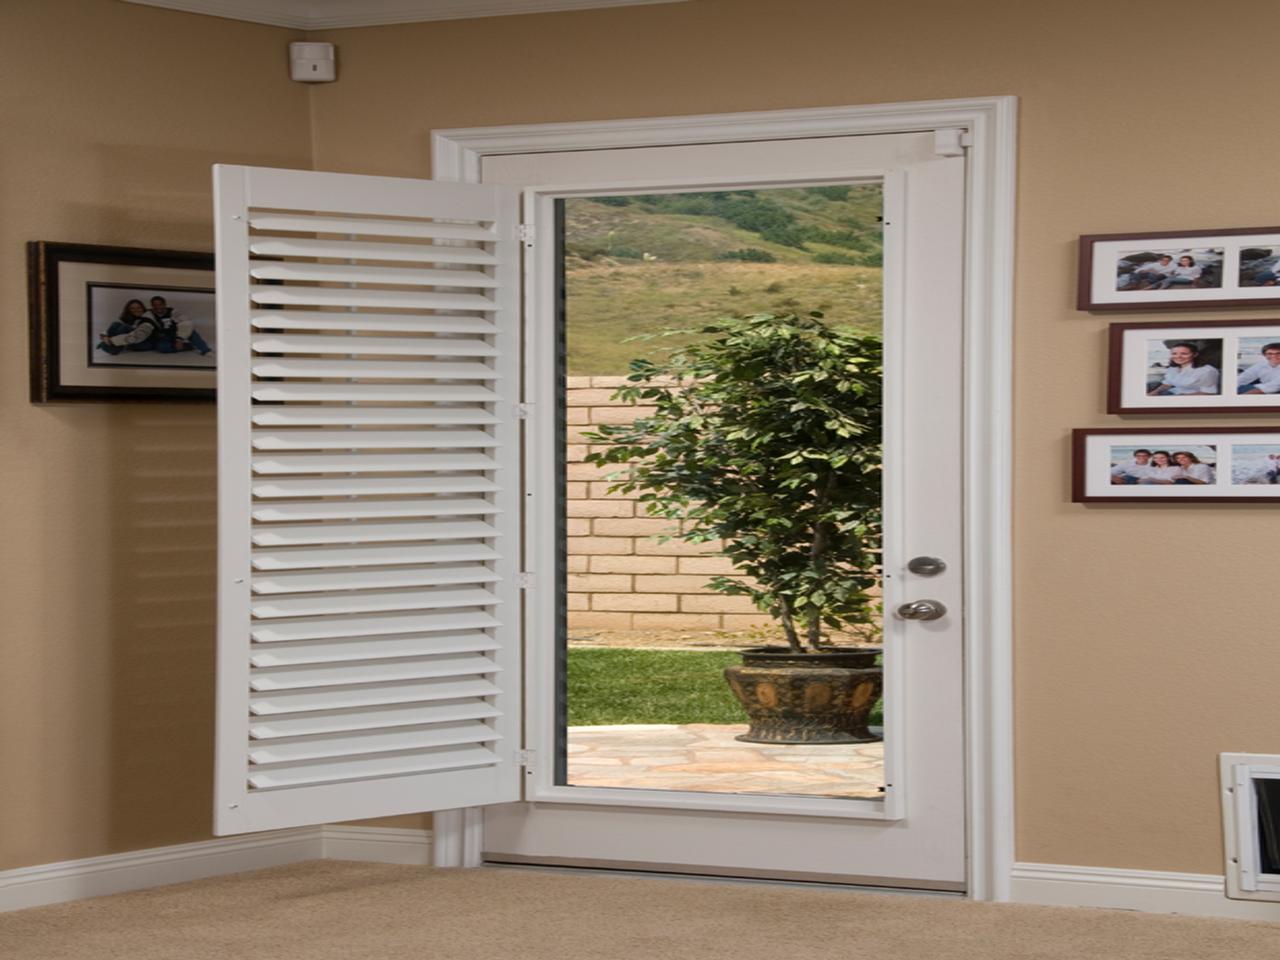 French door with shutters opened and away from the door